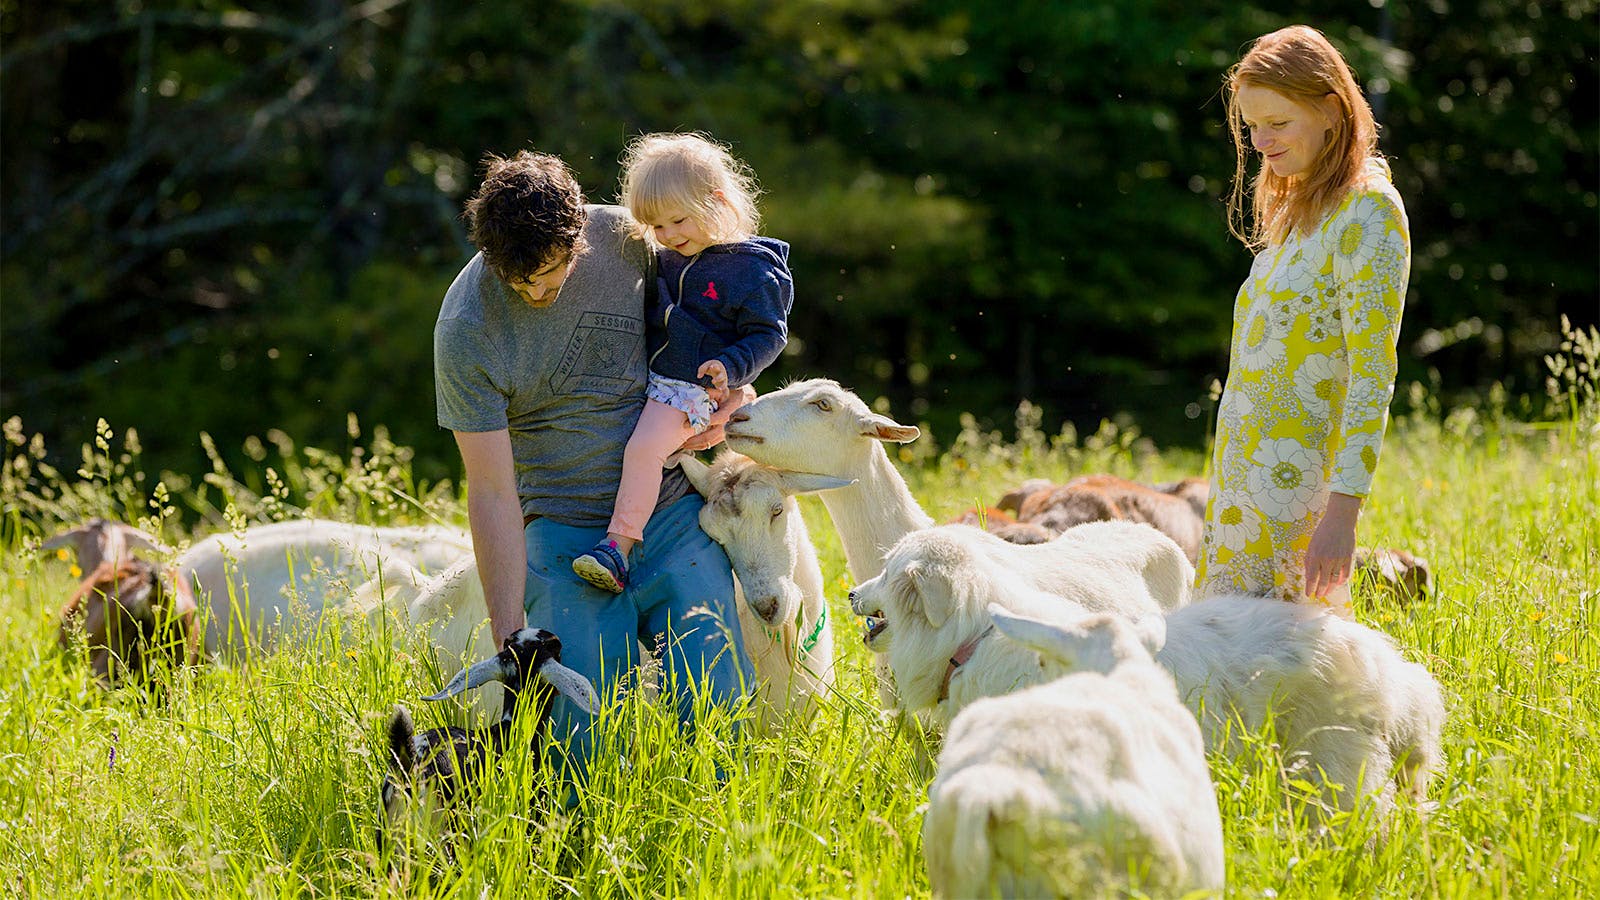 The owners with their young daughter, several goats and sheepdog